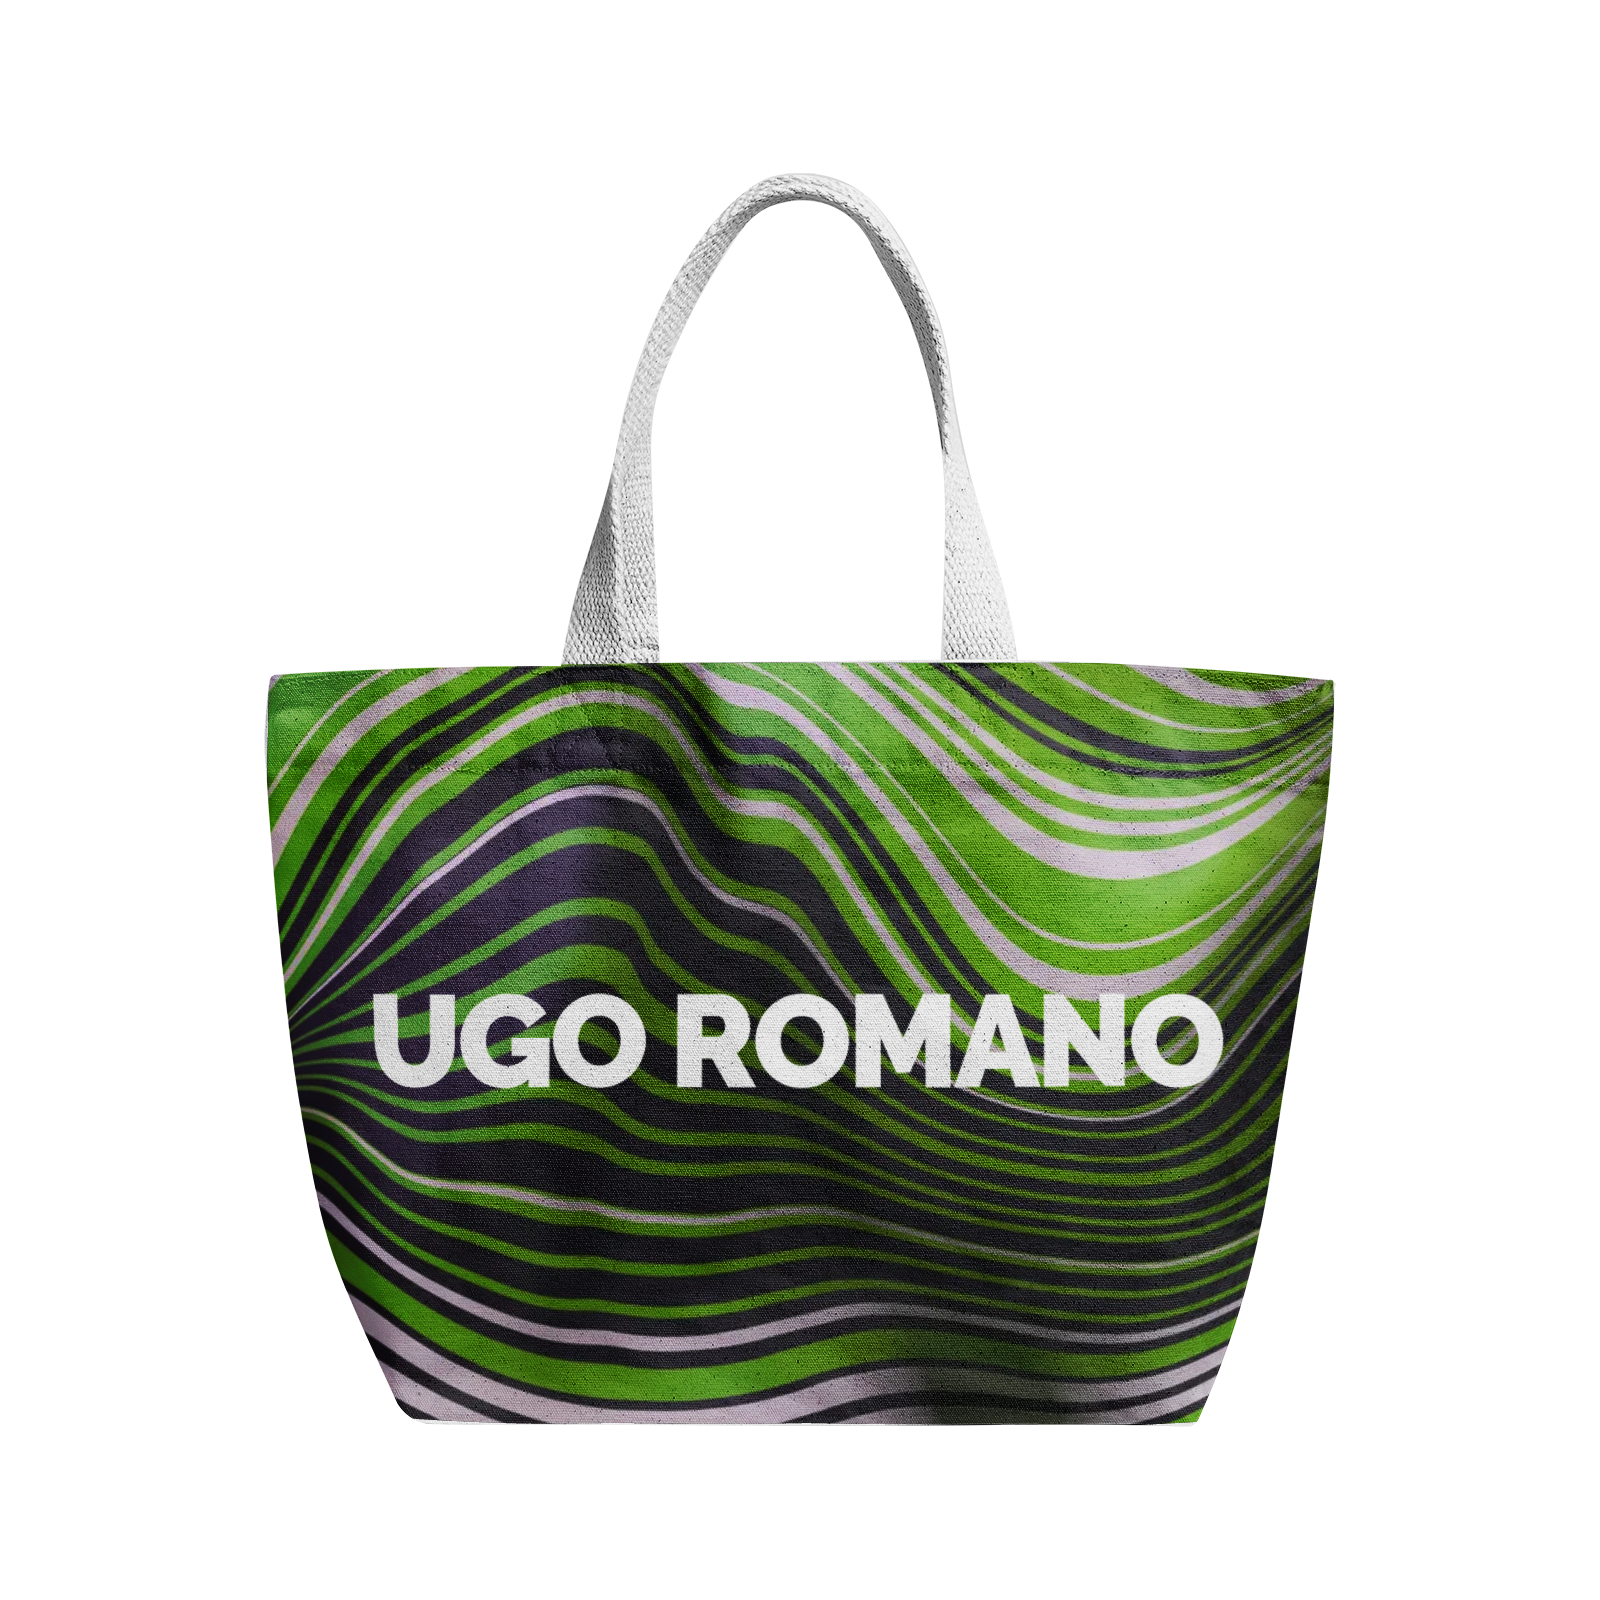 Heavy Duty and Strong Natural Cotton Canvas Tote Bag - UGO ROMANO URTB060